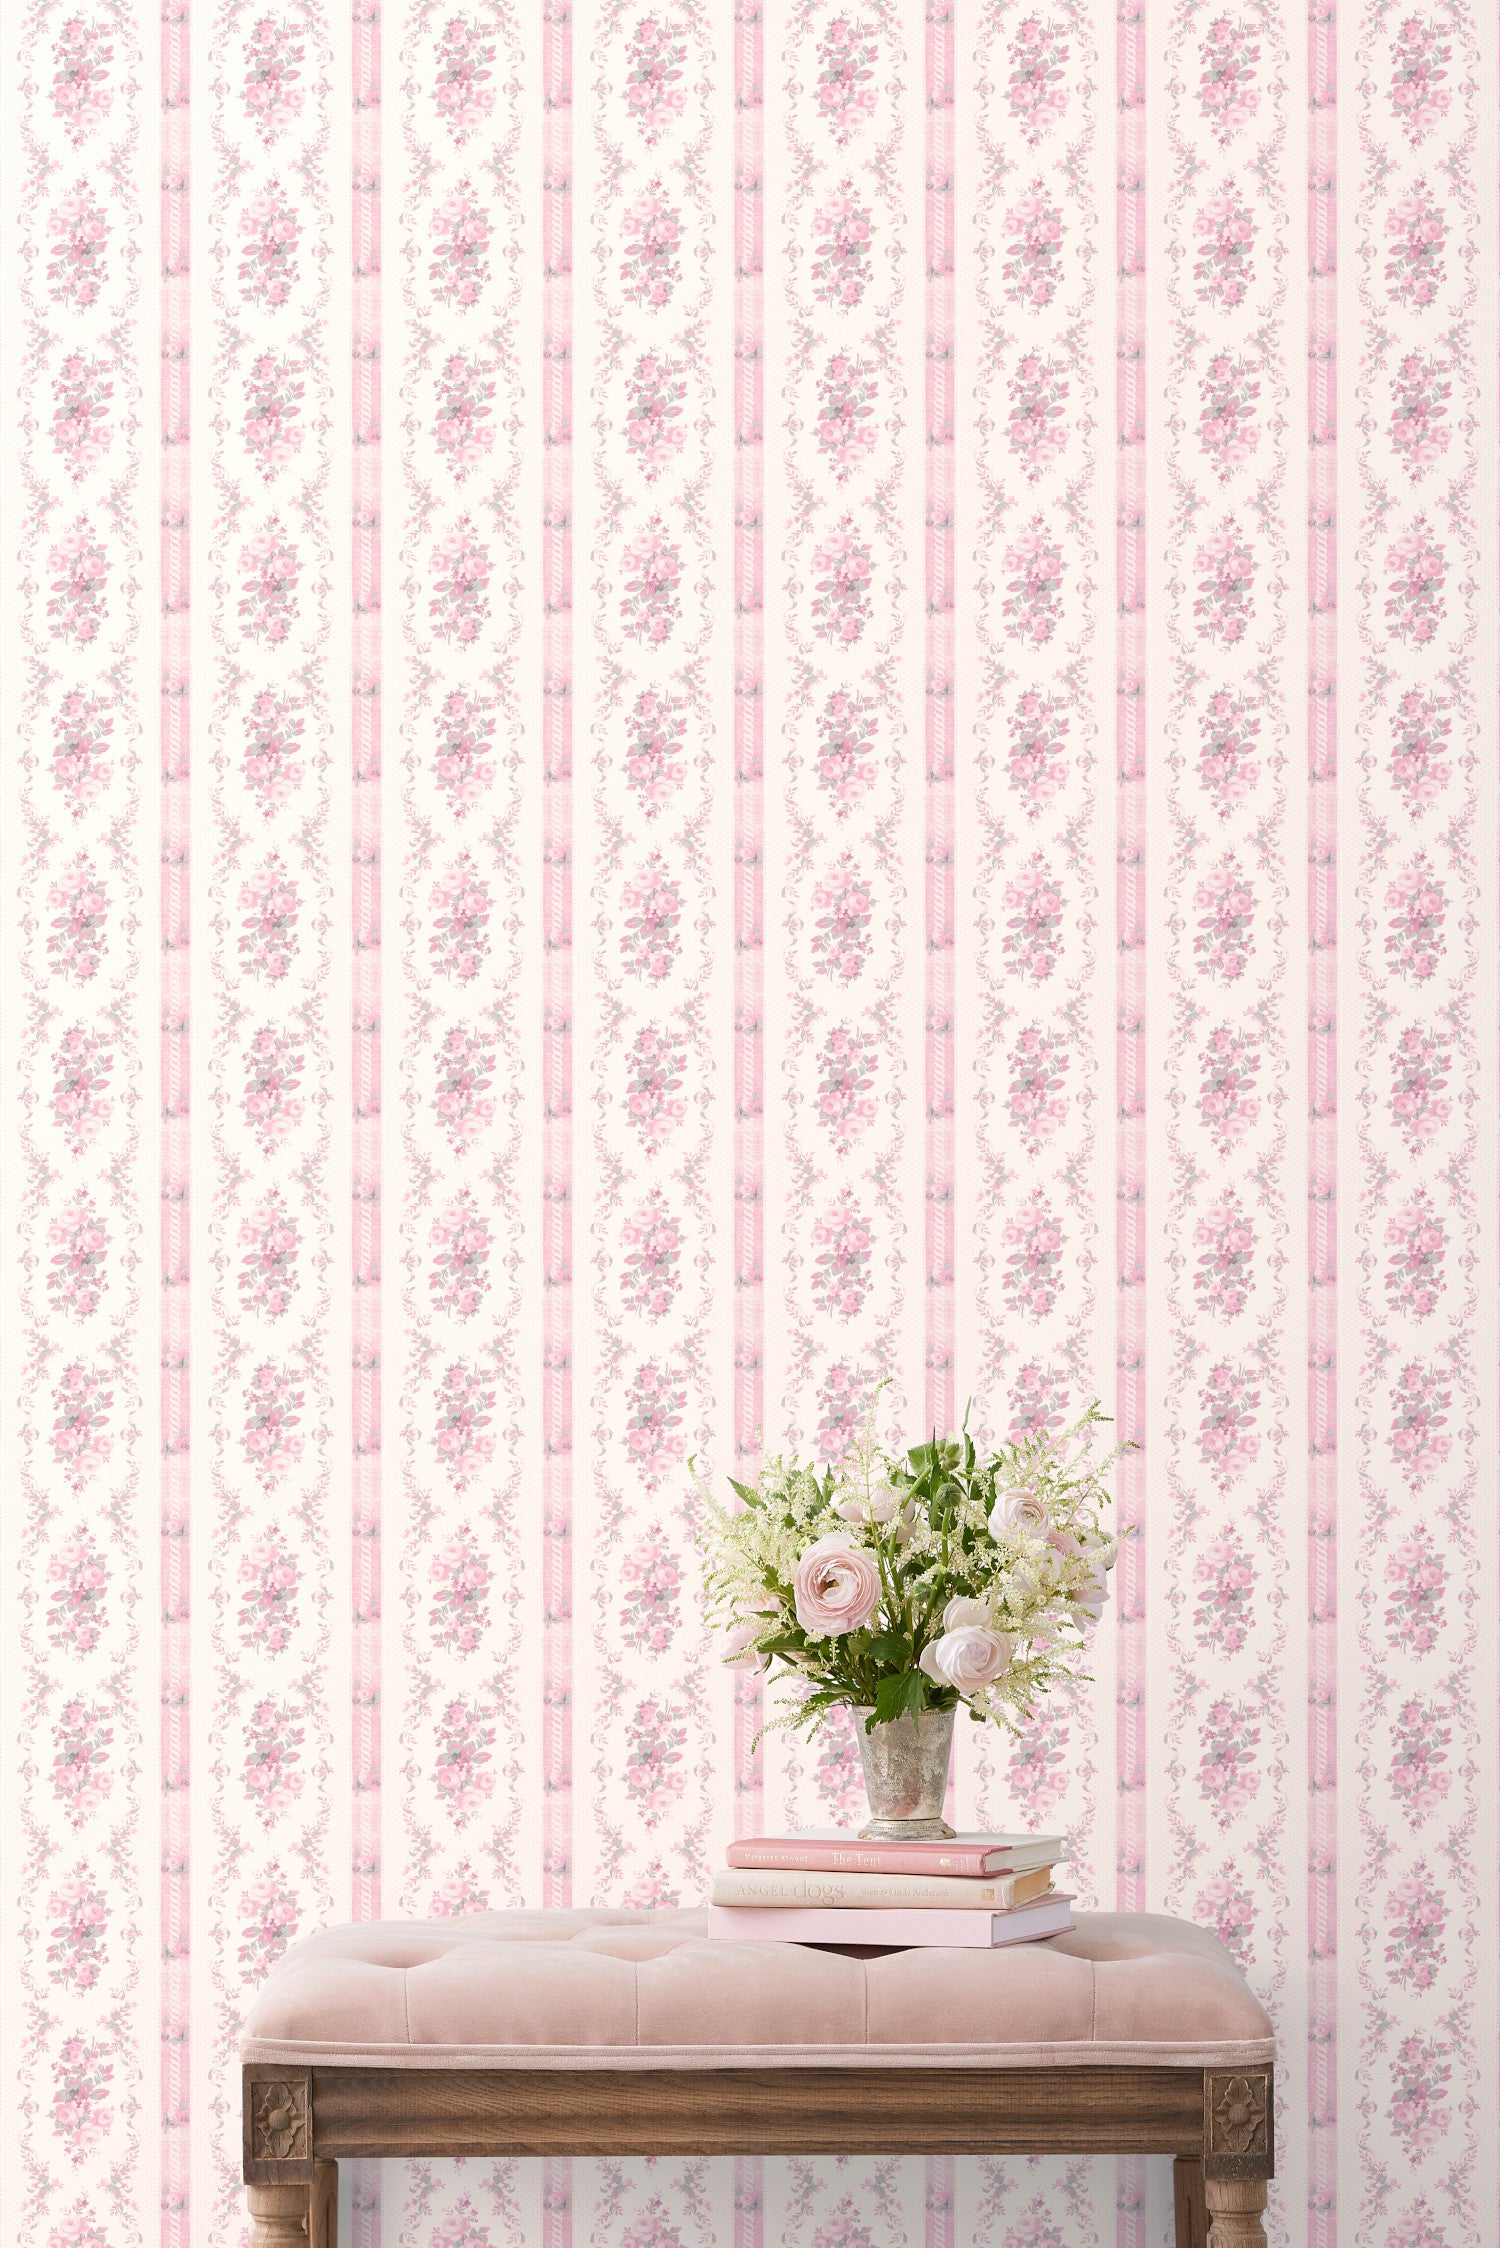 This design showcases beautiful baby pink floral prints delicately scattered across a pristine white backdrop. Adding to its visual appeal, a subtle pink strip elegantly separates the floral patterns, creating a sense of depth and space.